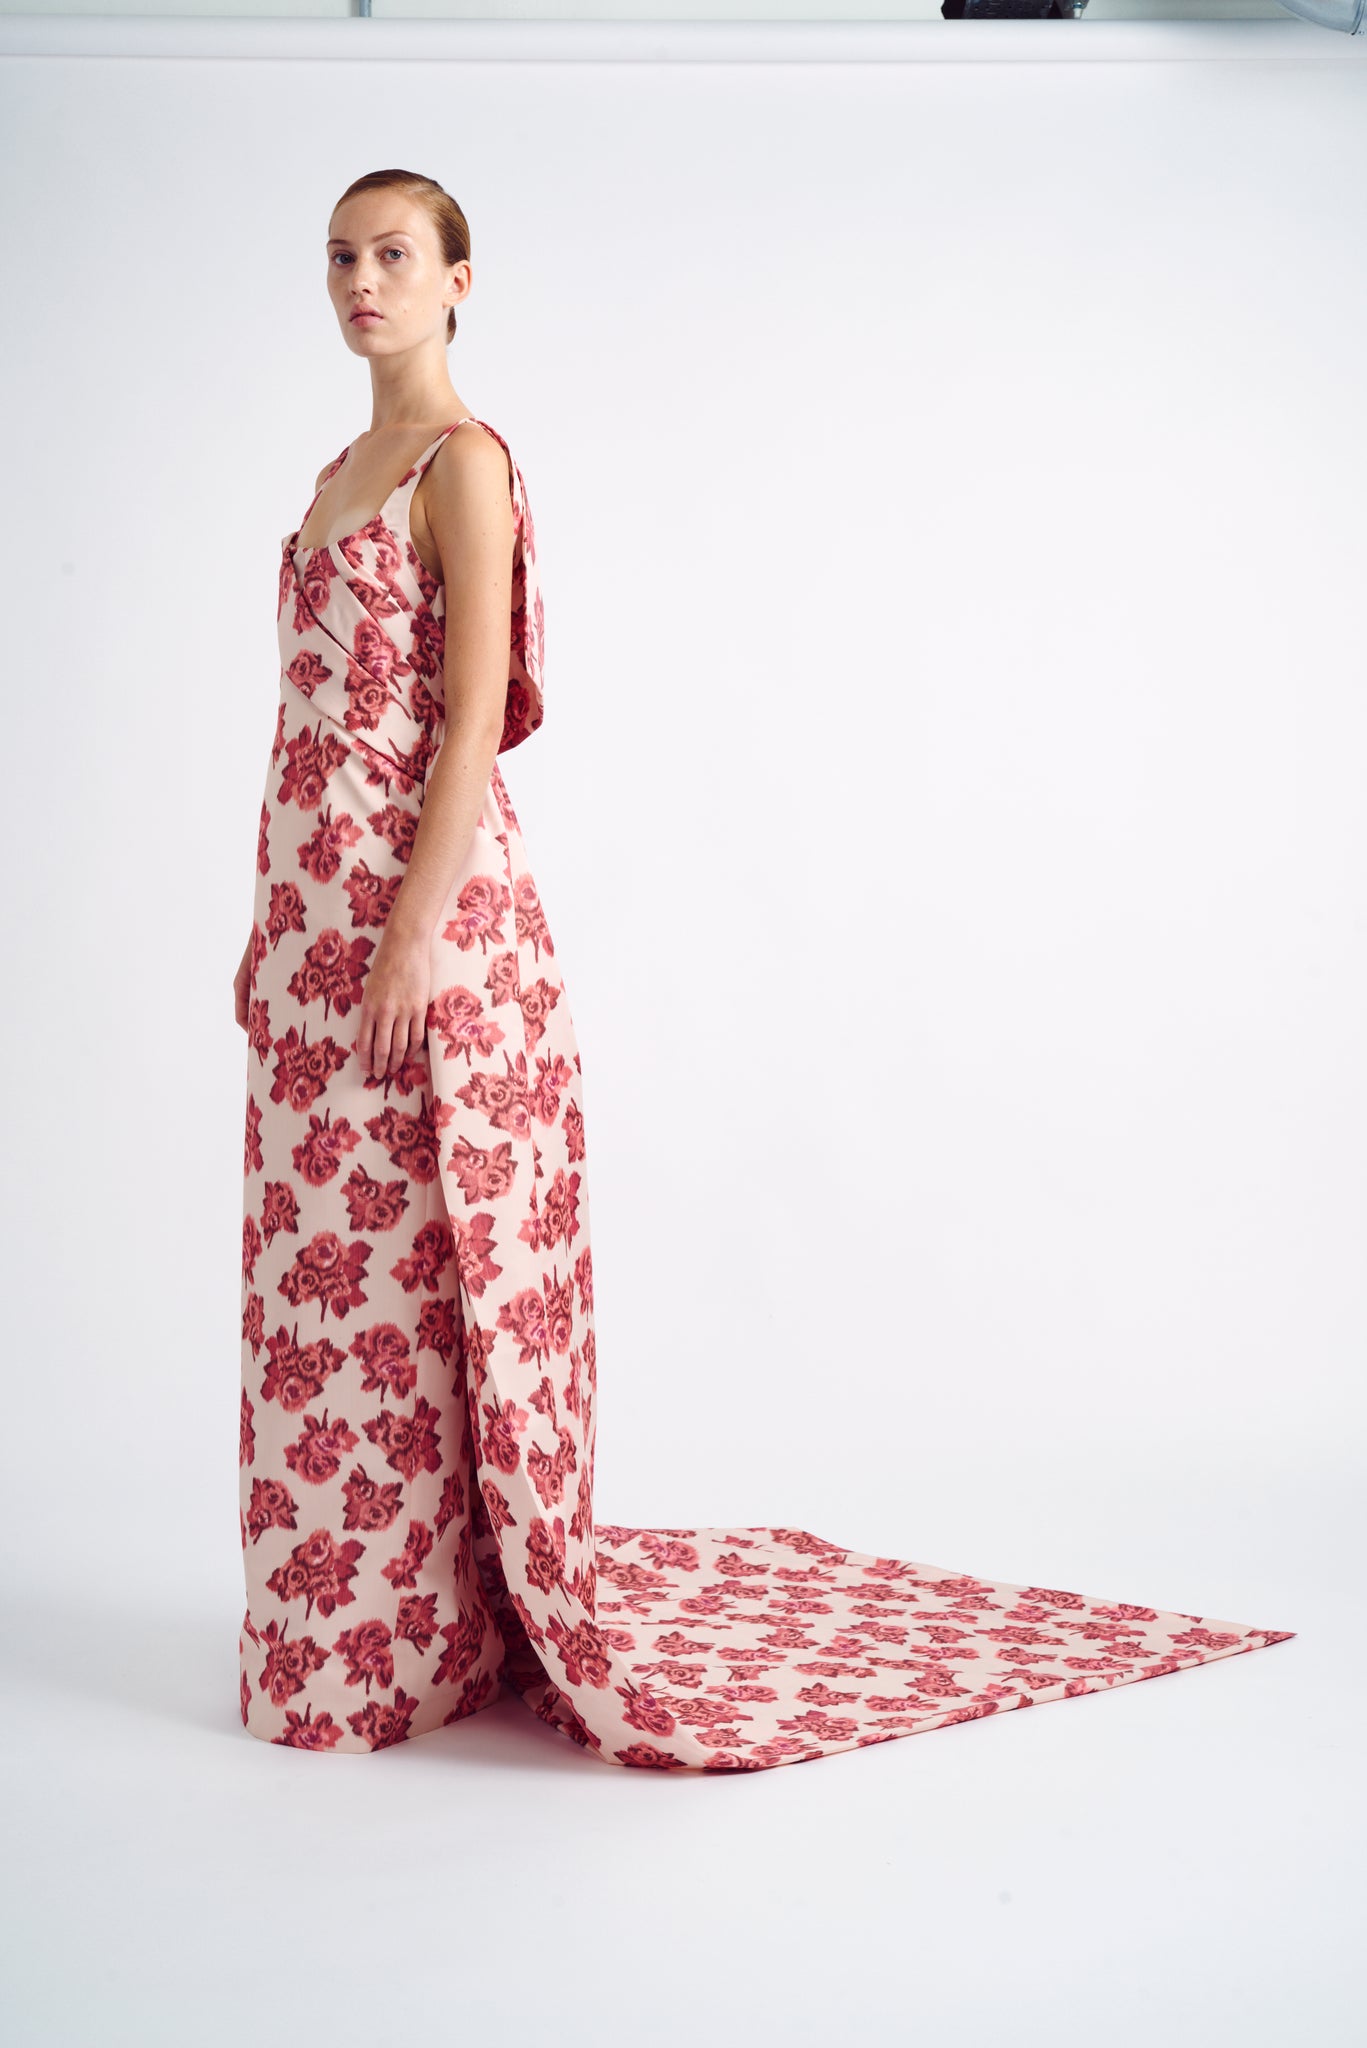 Asha Dress | Burgundy & Pink Floral Printed Gown WIth Train | Emilia Wickstead